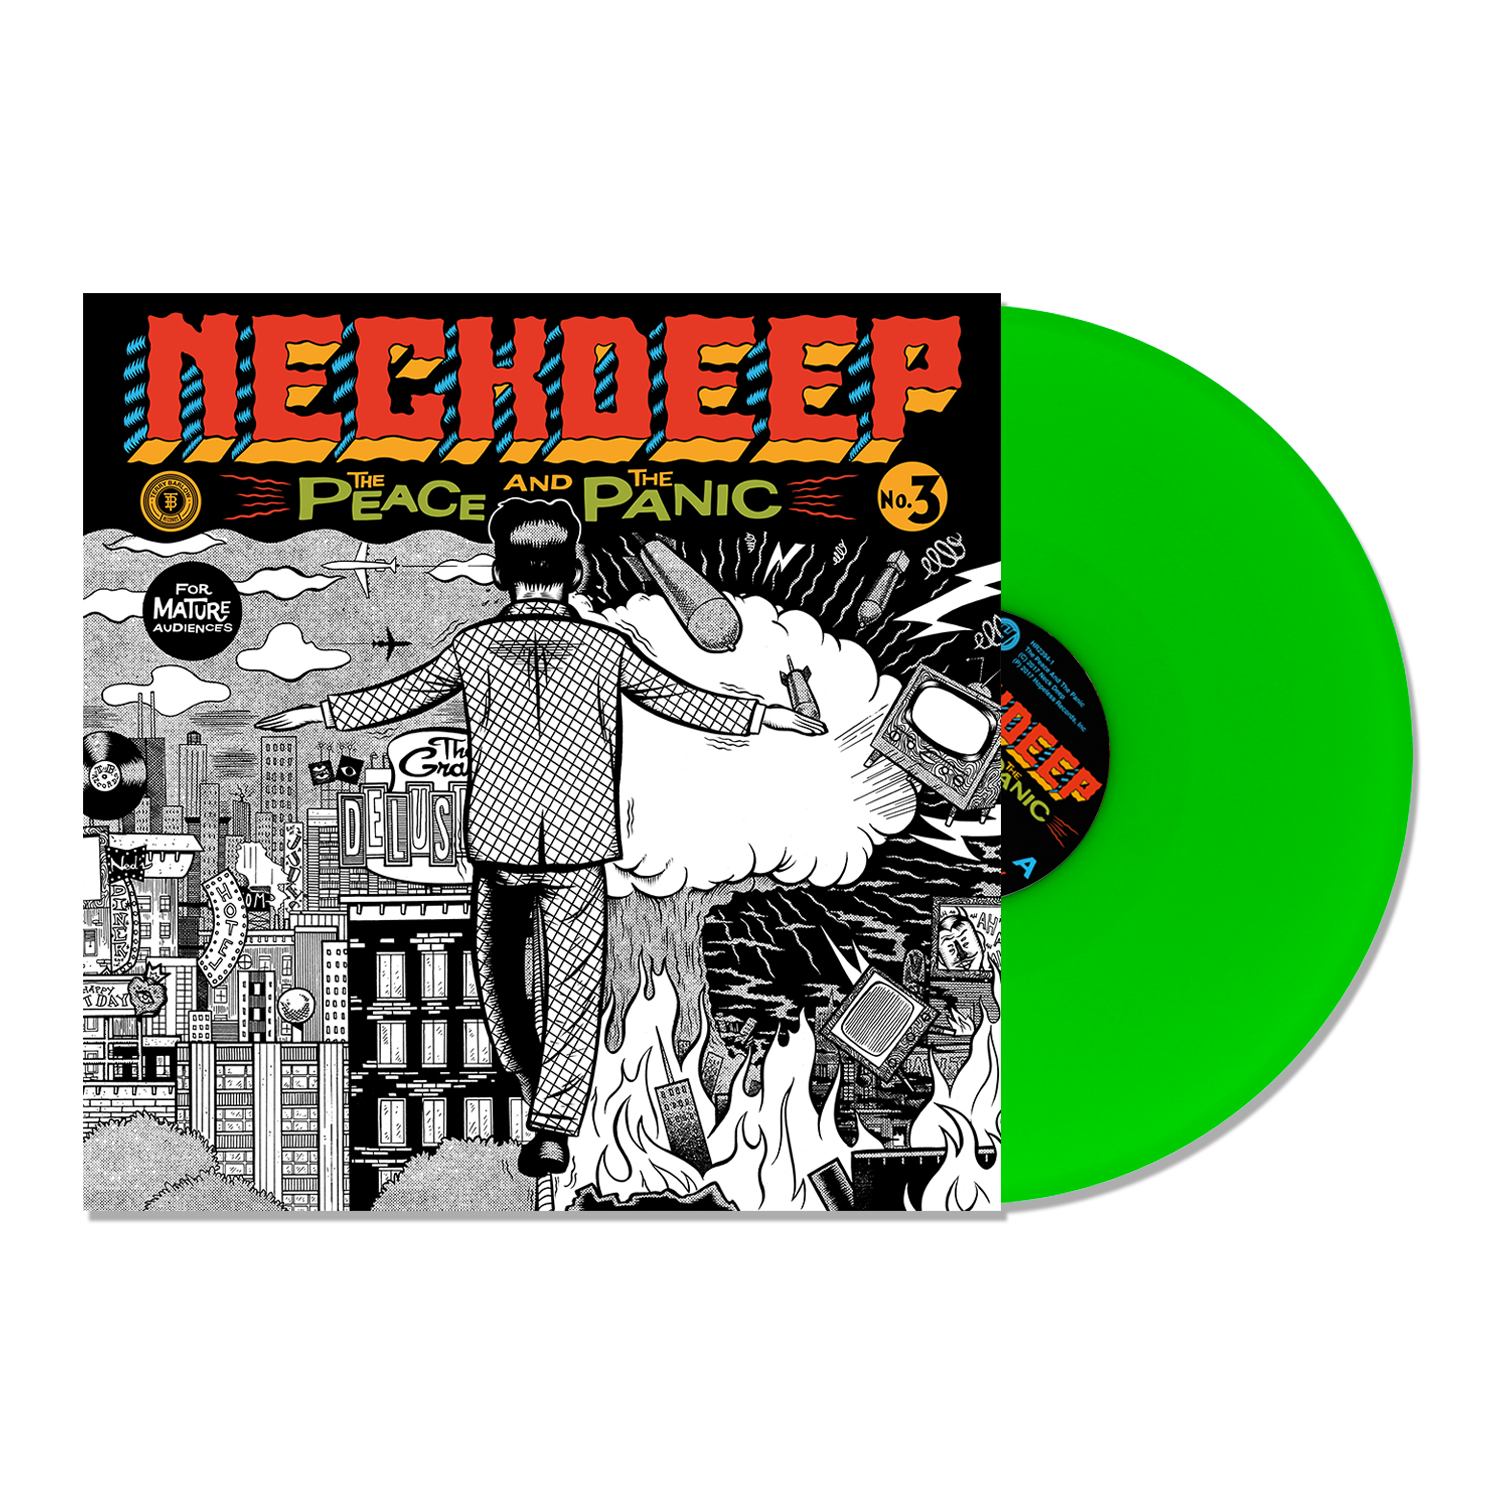 Neck Deep - The Peace and the Panic: Limited Edition Neon Green Vinyl LP